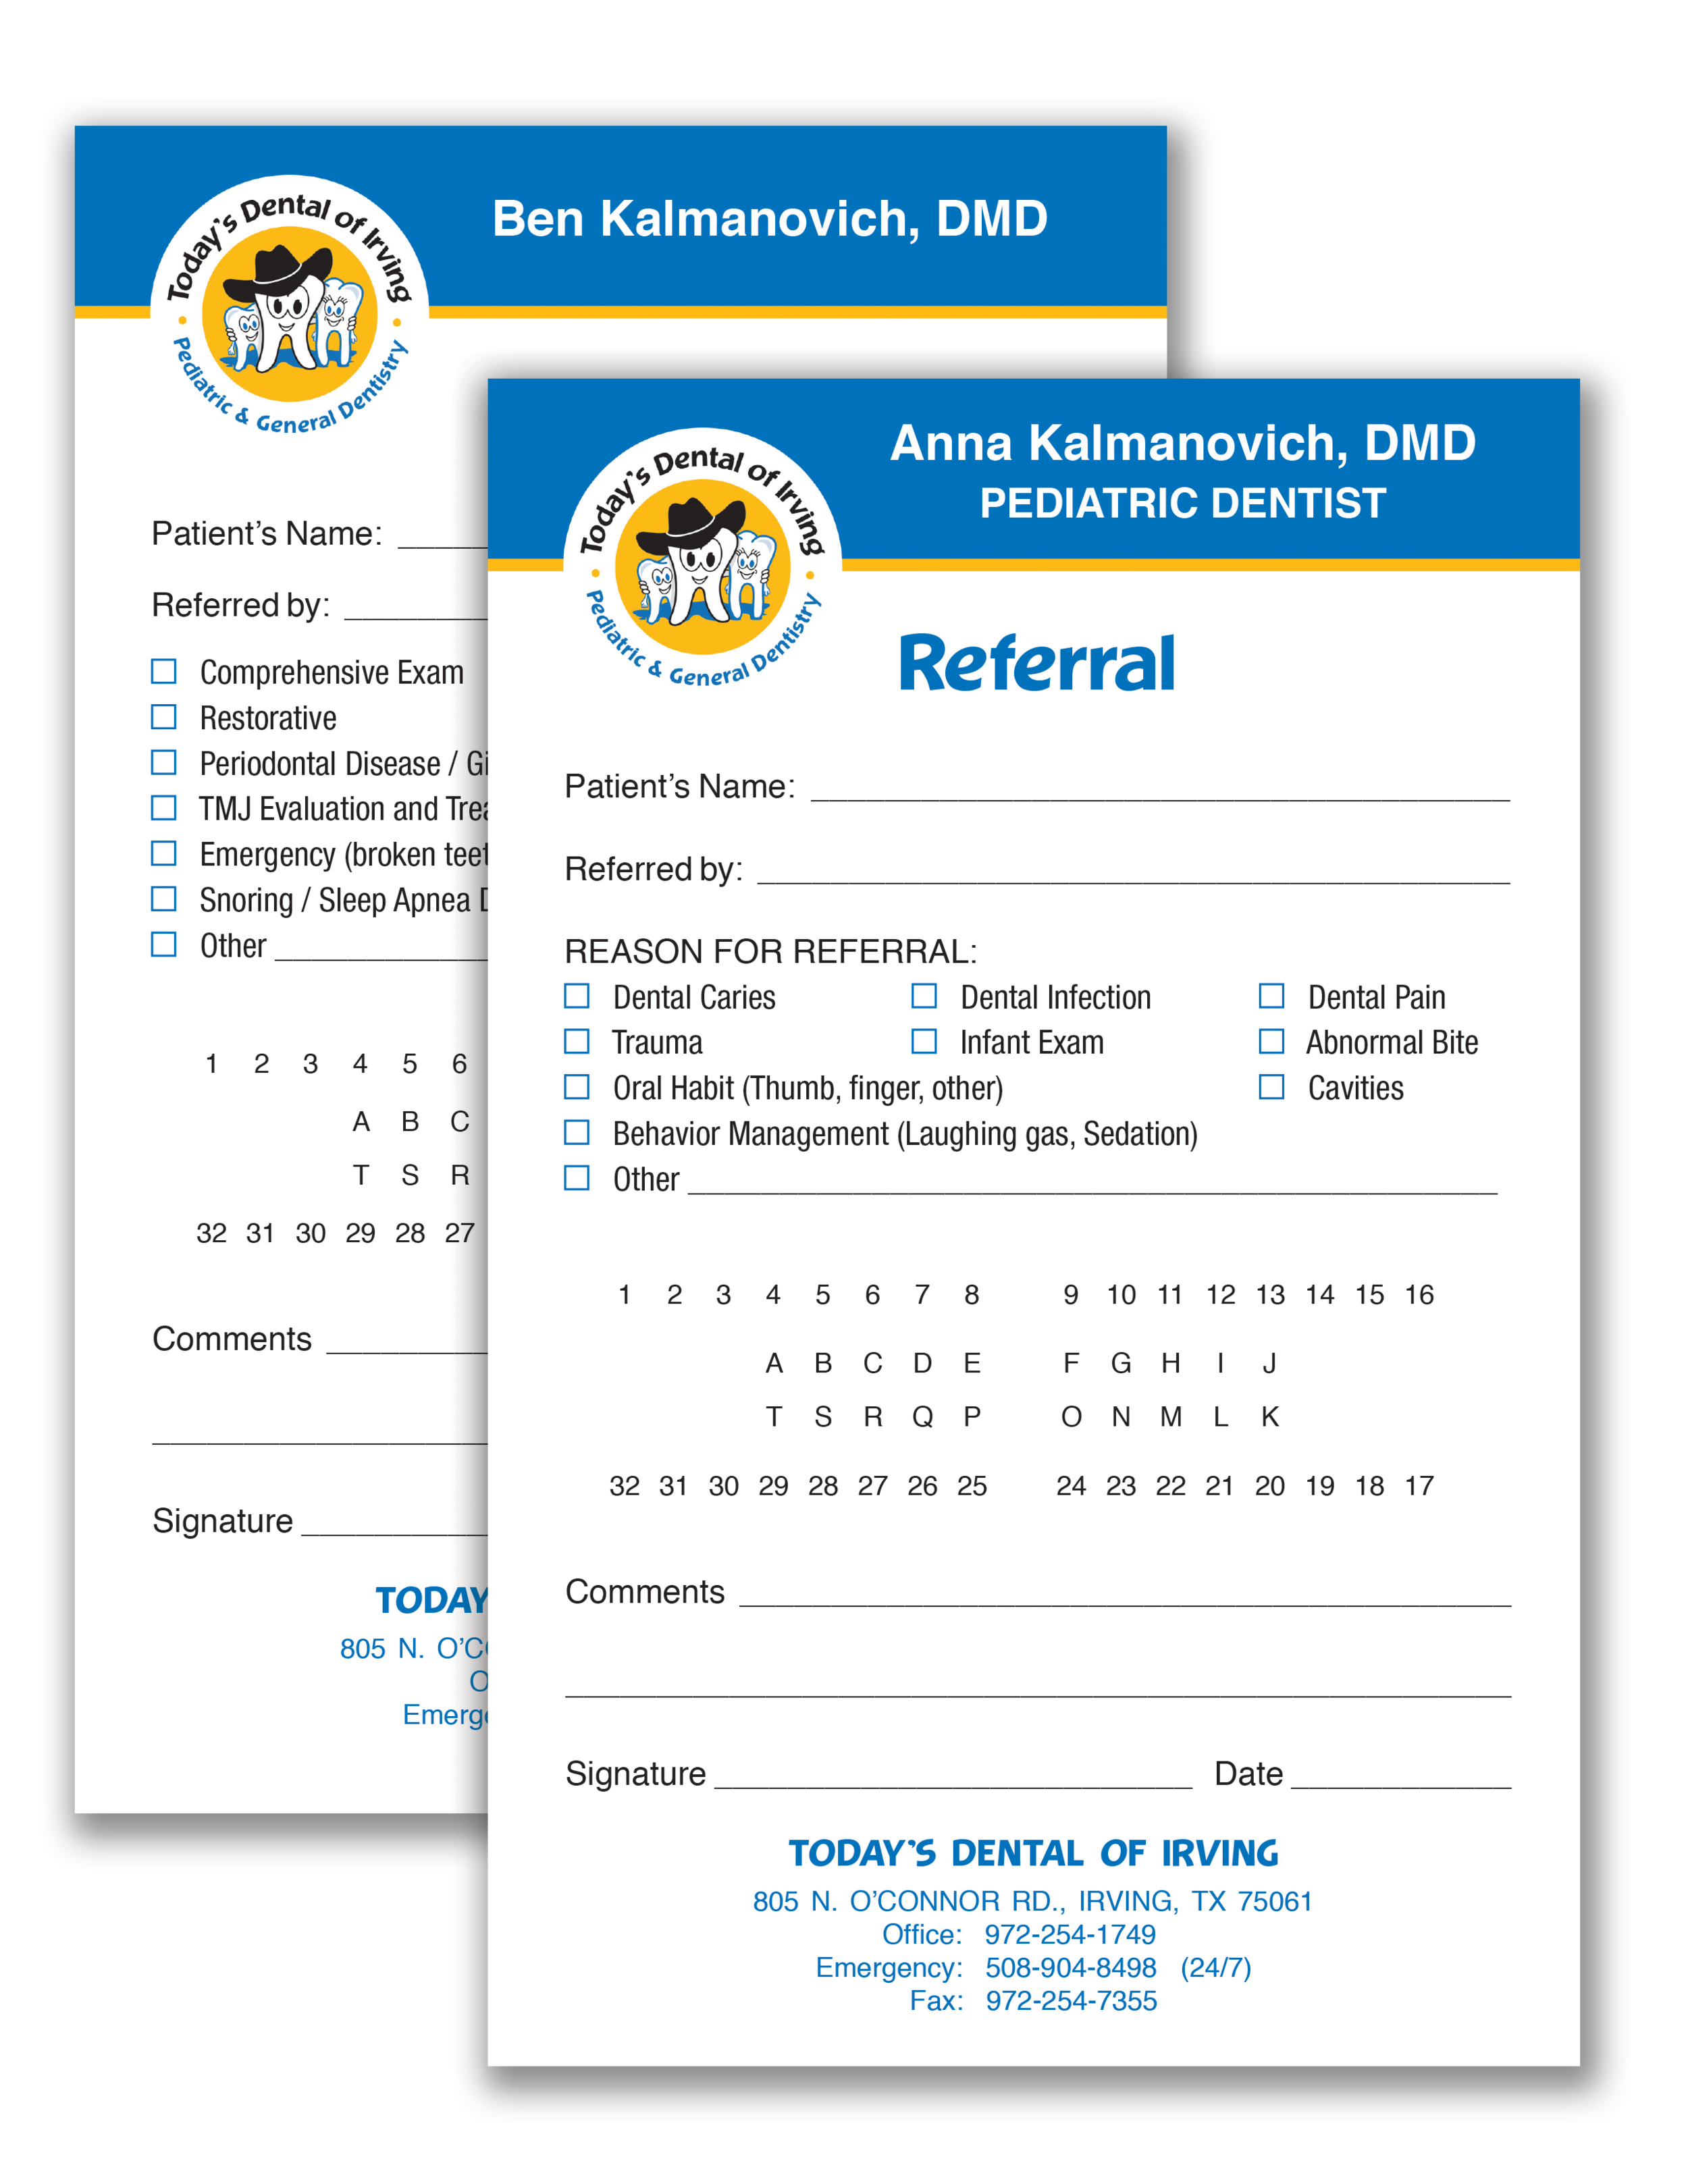 TDI Referral pads.png